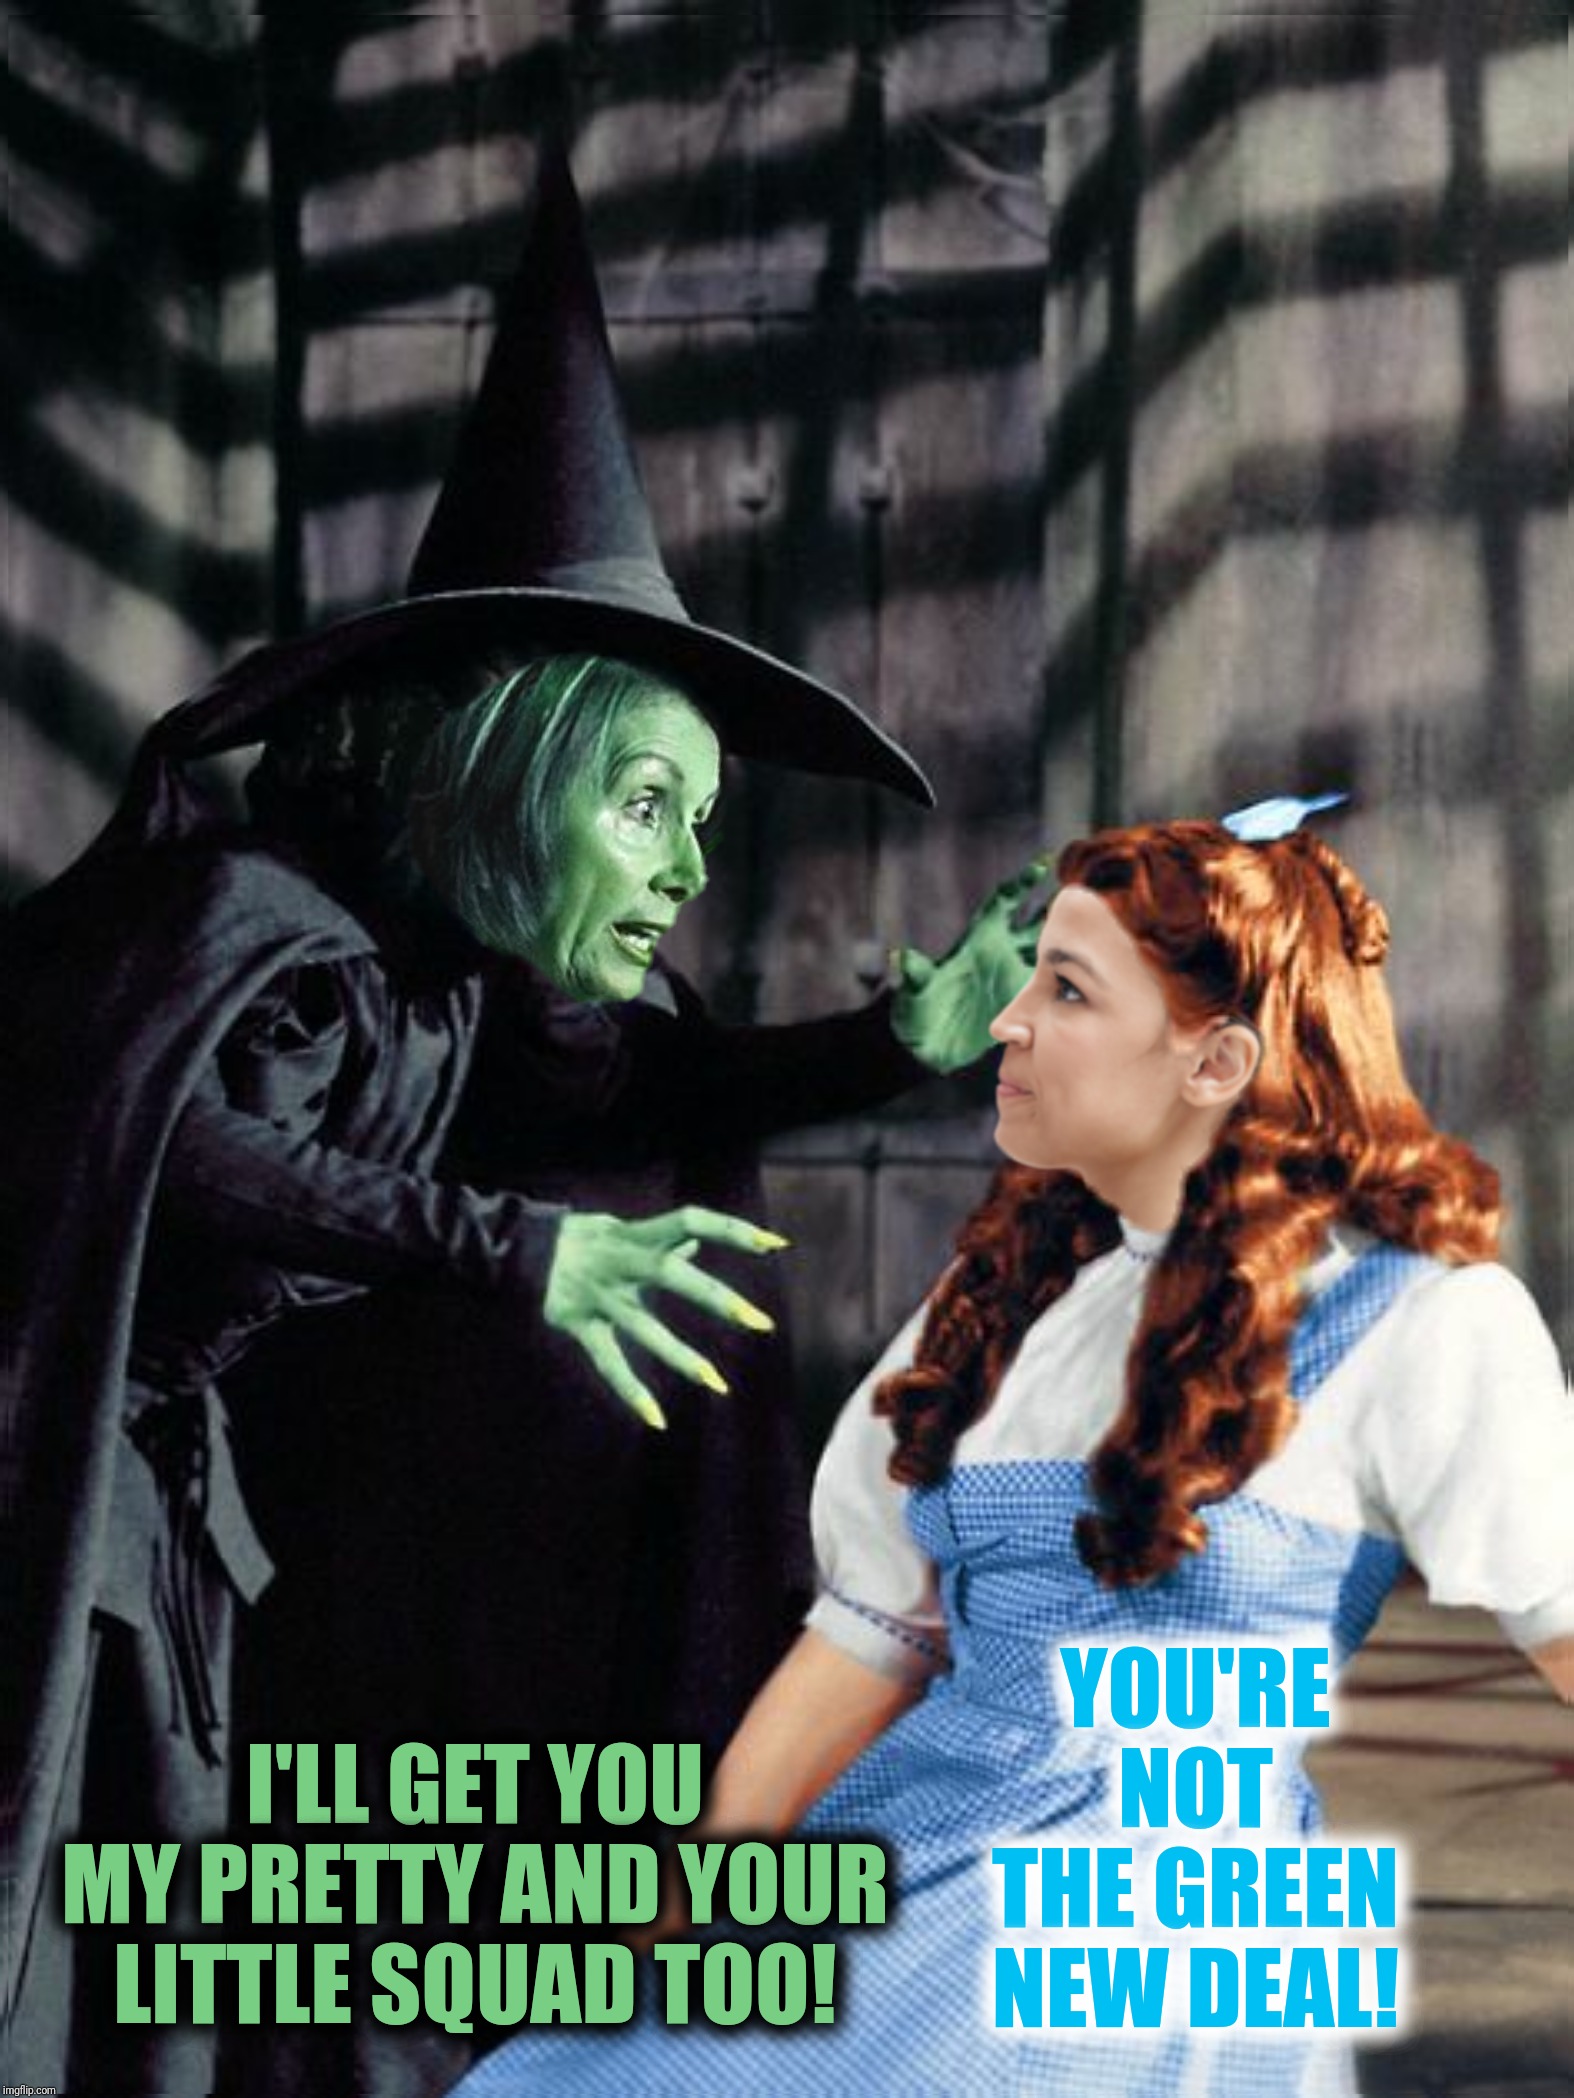 Bad Photoshop Sunday presents:  The Wicked Witch Of The West Coast | YOU'RE NOT THE GREEN NEW DEAL! I'LL GET YOU MY PRETTY AND YOUR LITTLE SQUAD TOO! | image tagged in bad photoshop sunday,wizard of oz,nancy pelosi,alexandria ocasio-cortez | made w/ Imgflip meme maker